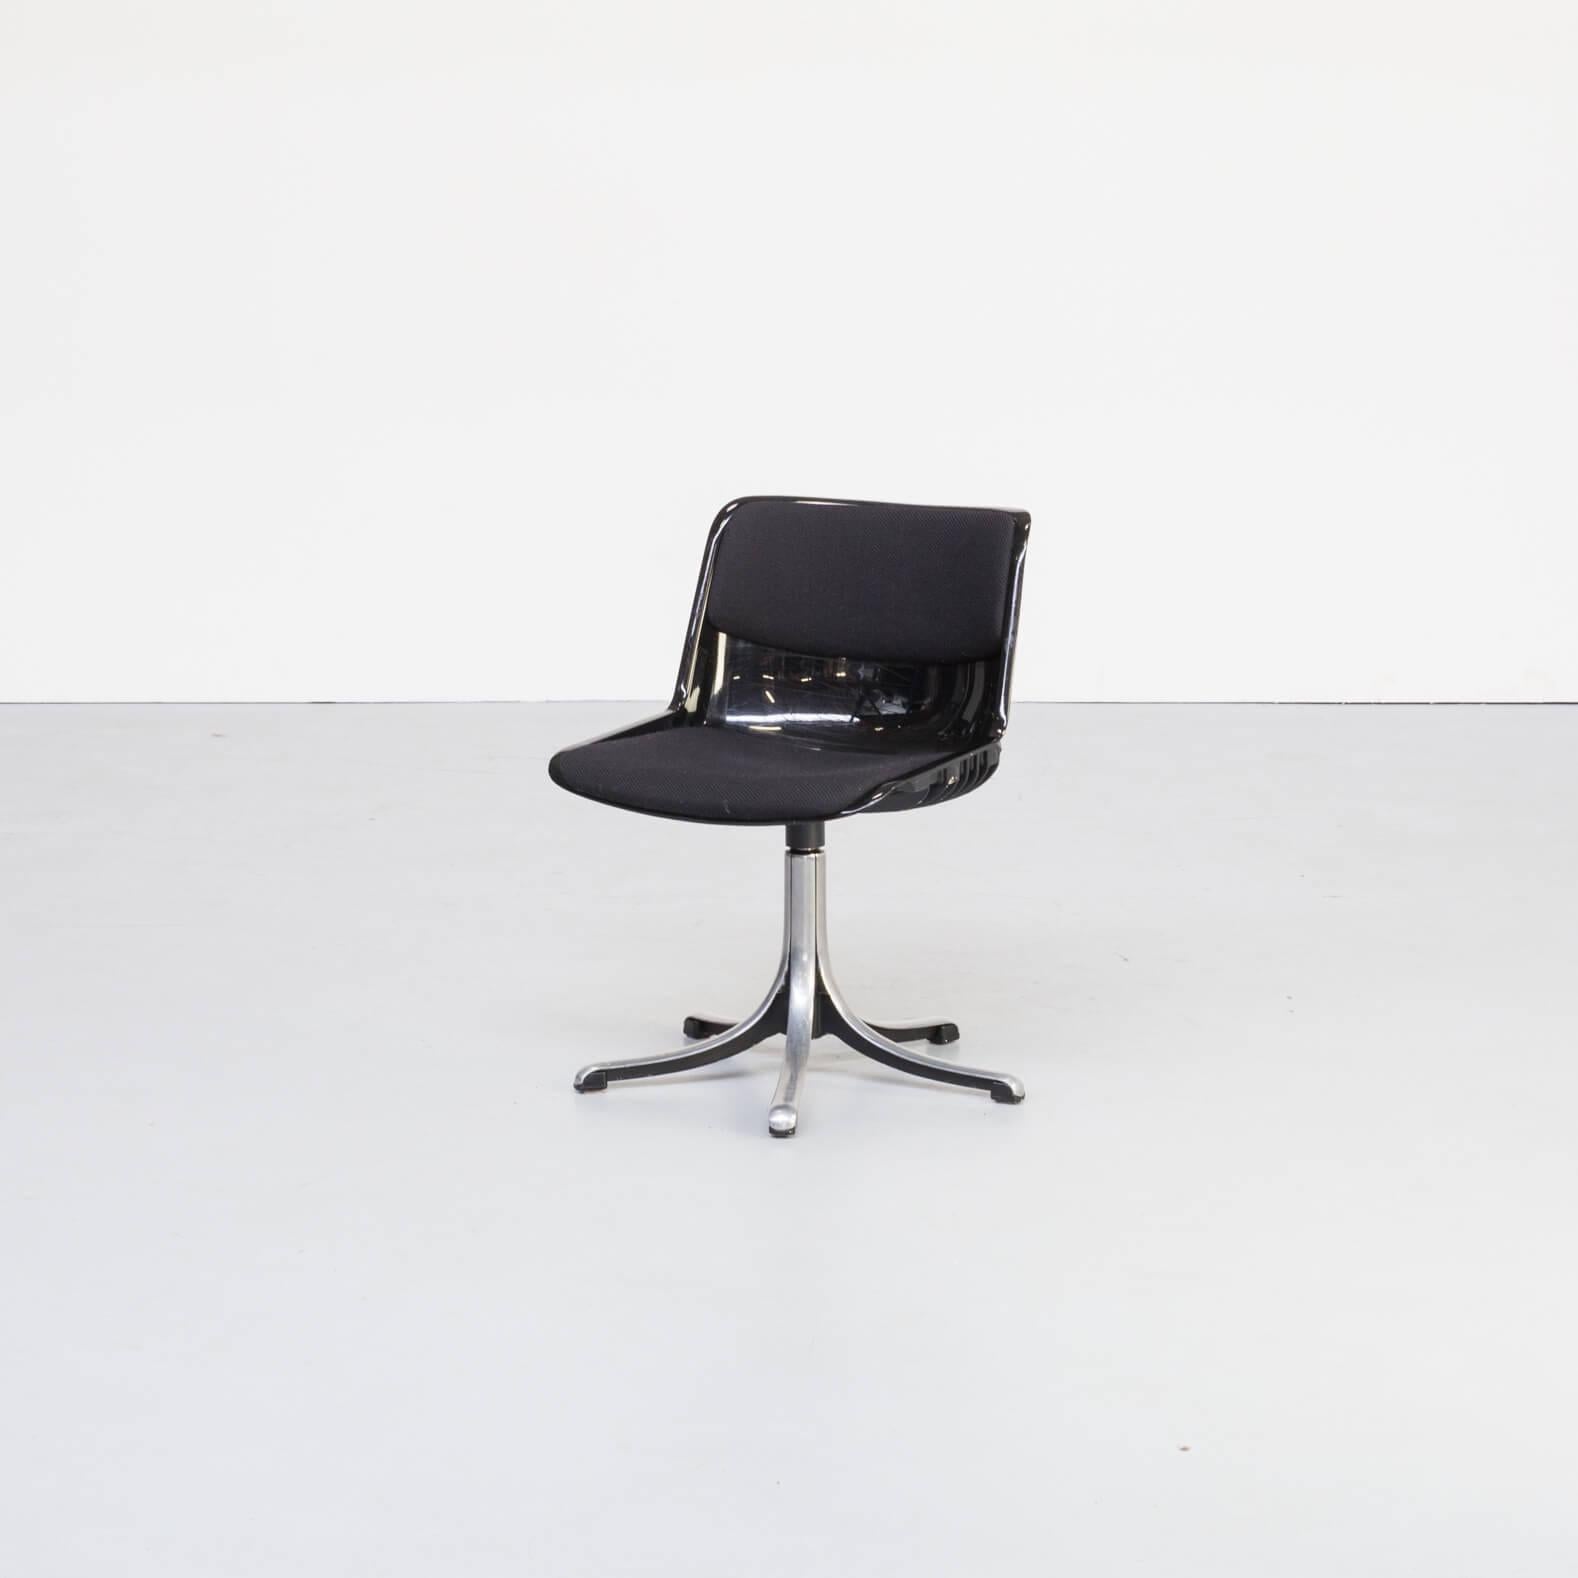 1970s Osvaldo Borsani ‘modus’ desk chair for Tecno. Good condition consistent with age and use. Adjustable height from 70-82.5cm and seat height from 40-53cm.